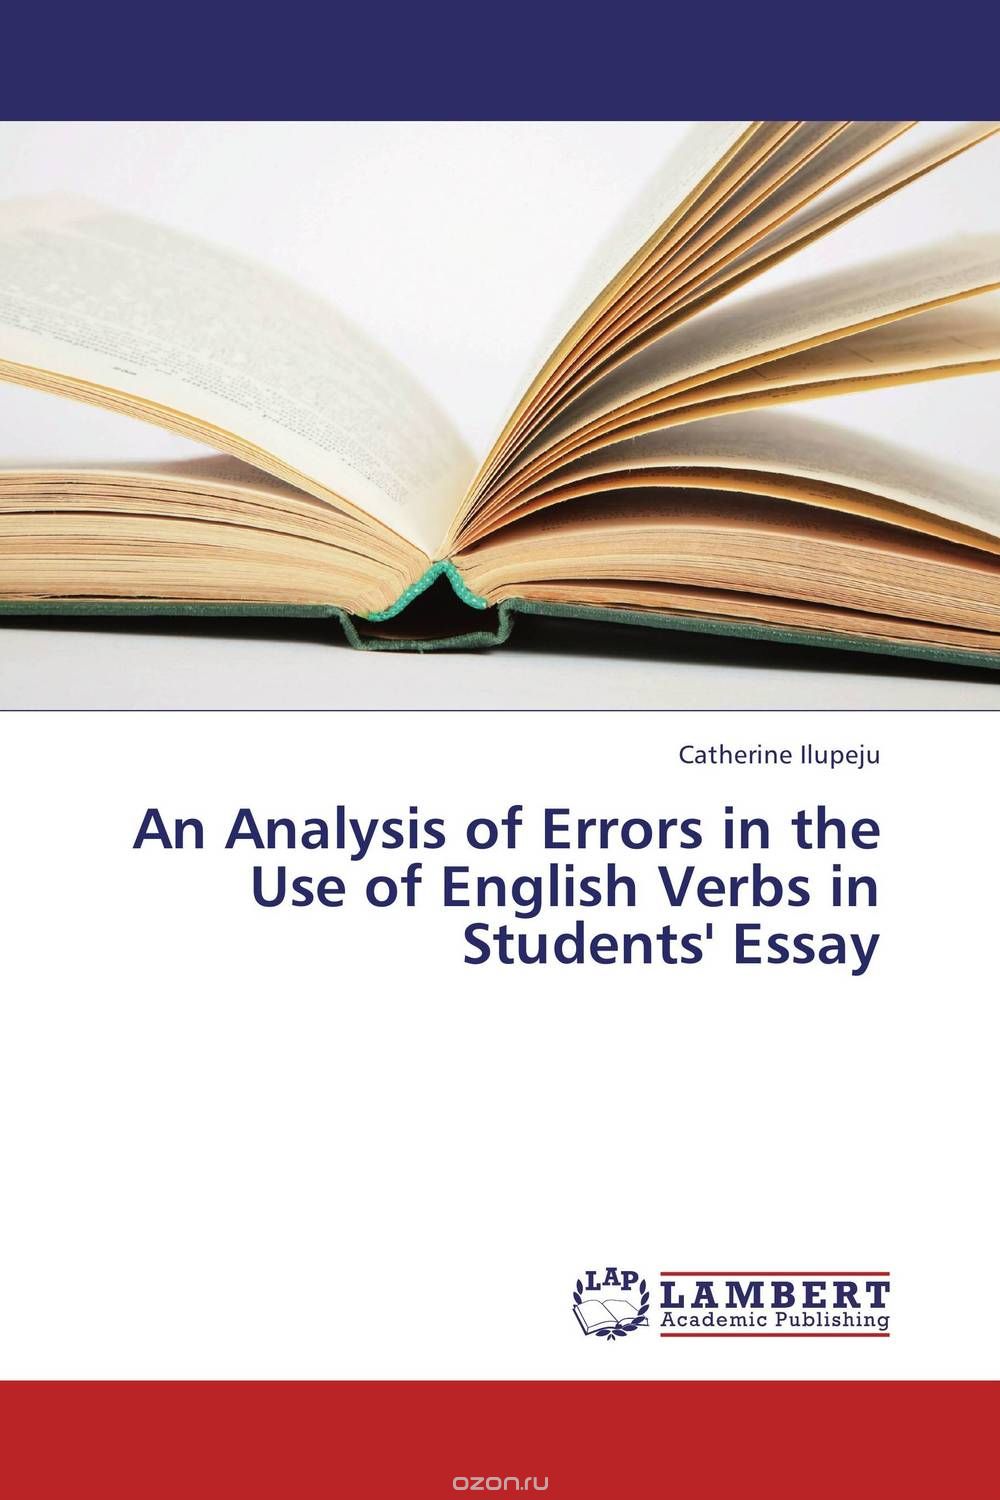 Скачать книгу "An Analysis of Errors in the Use of English Verbs in Students' Essay"